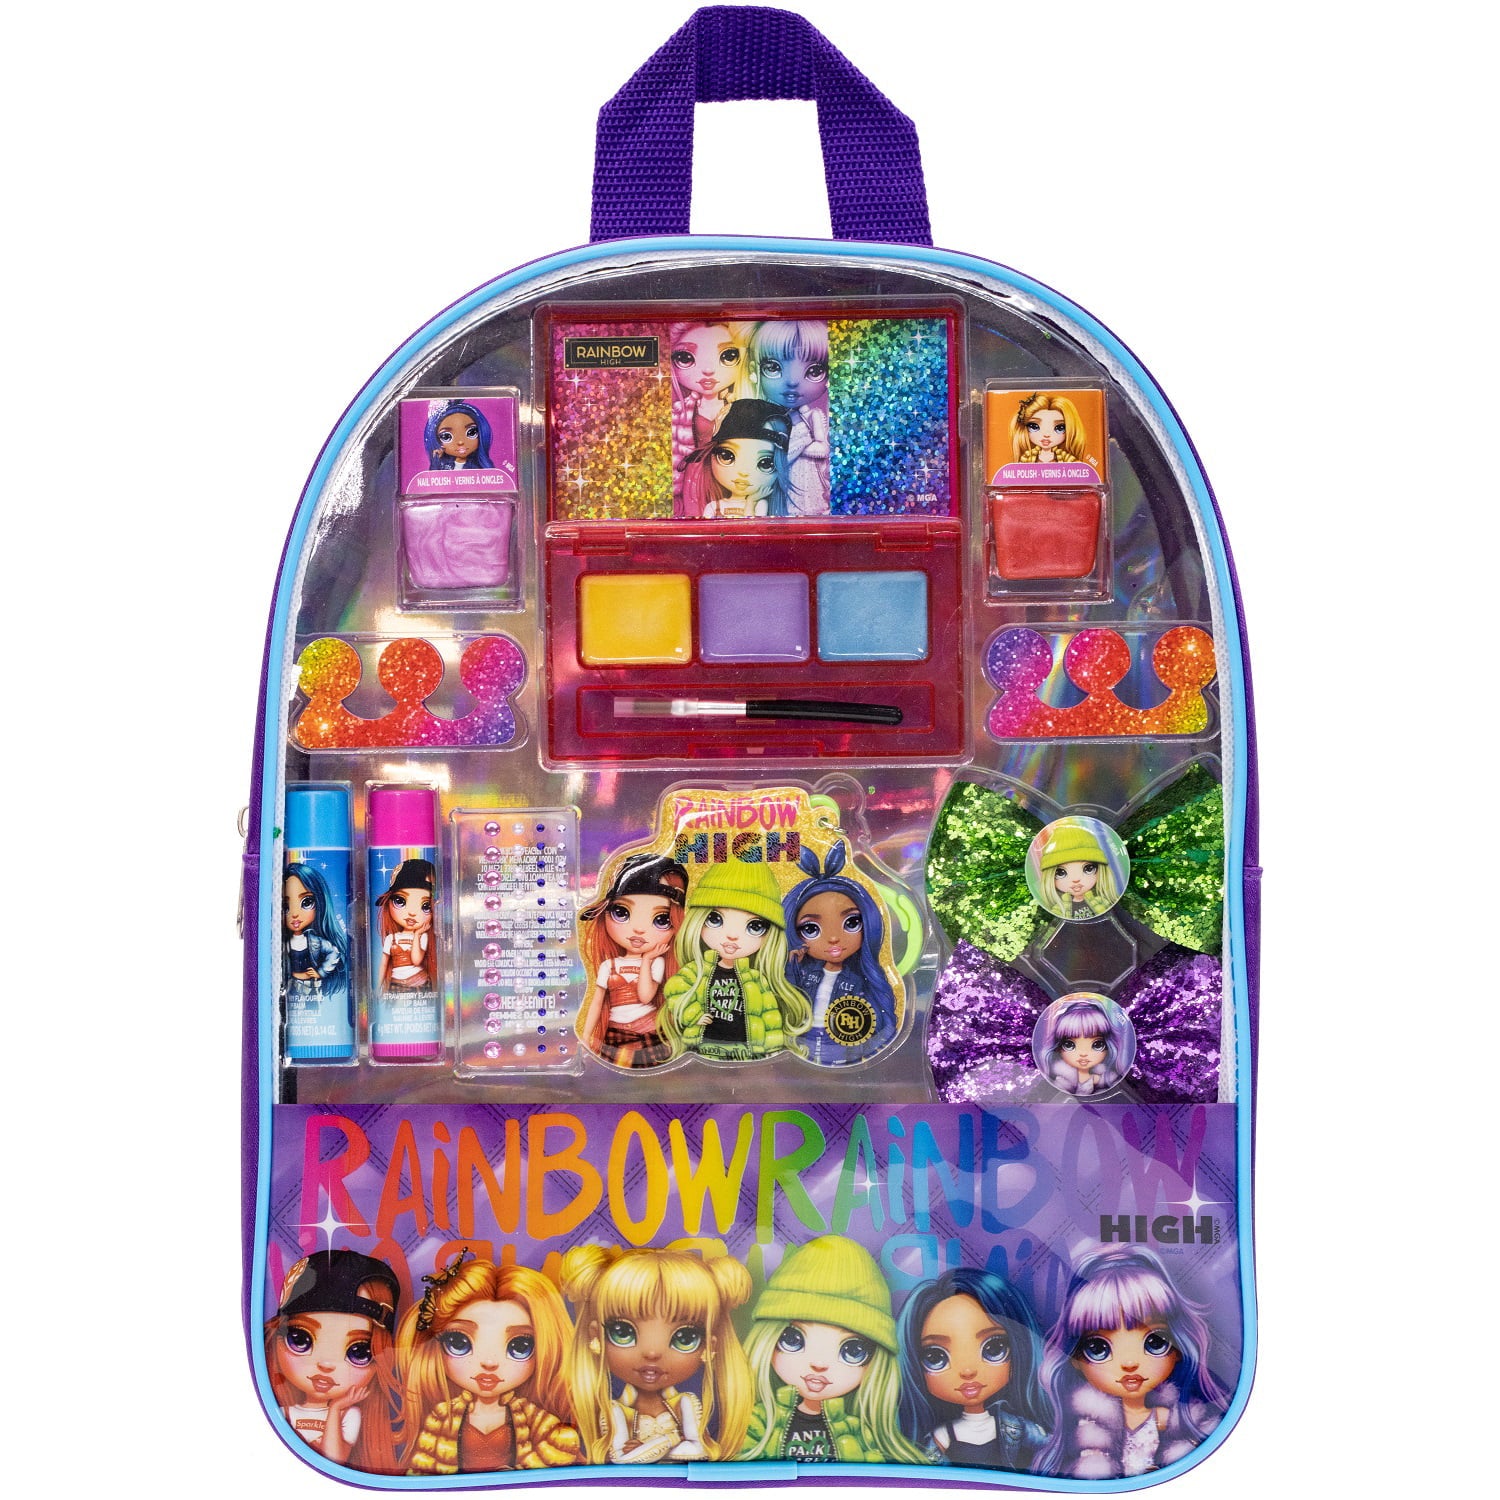 Rainbow High - Townley Girl Backpack Cosmetic Makeup Gift Bag Set for Girls, Ages 3+